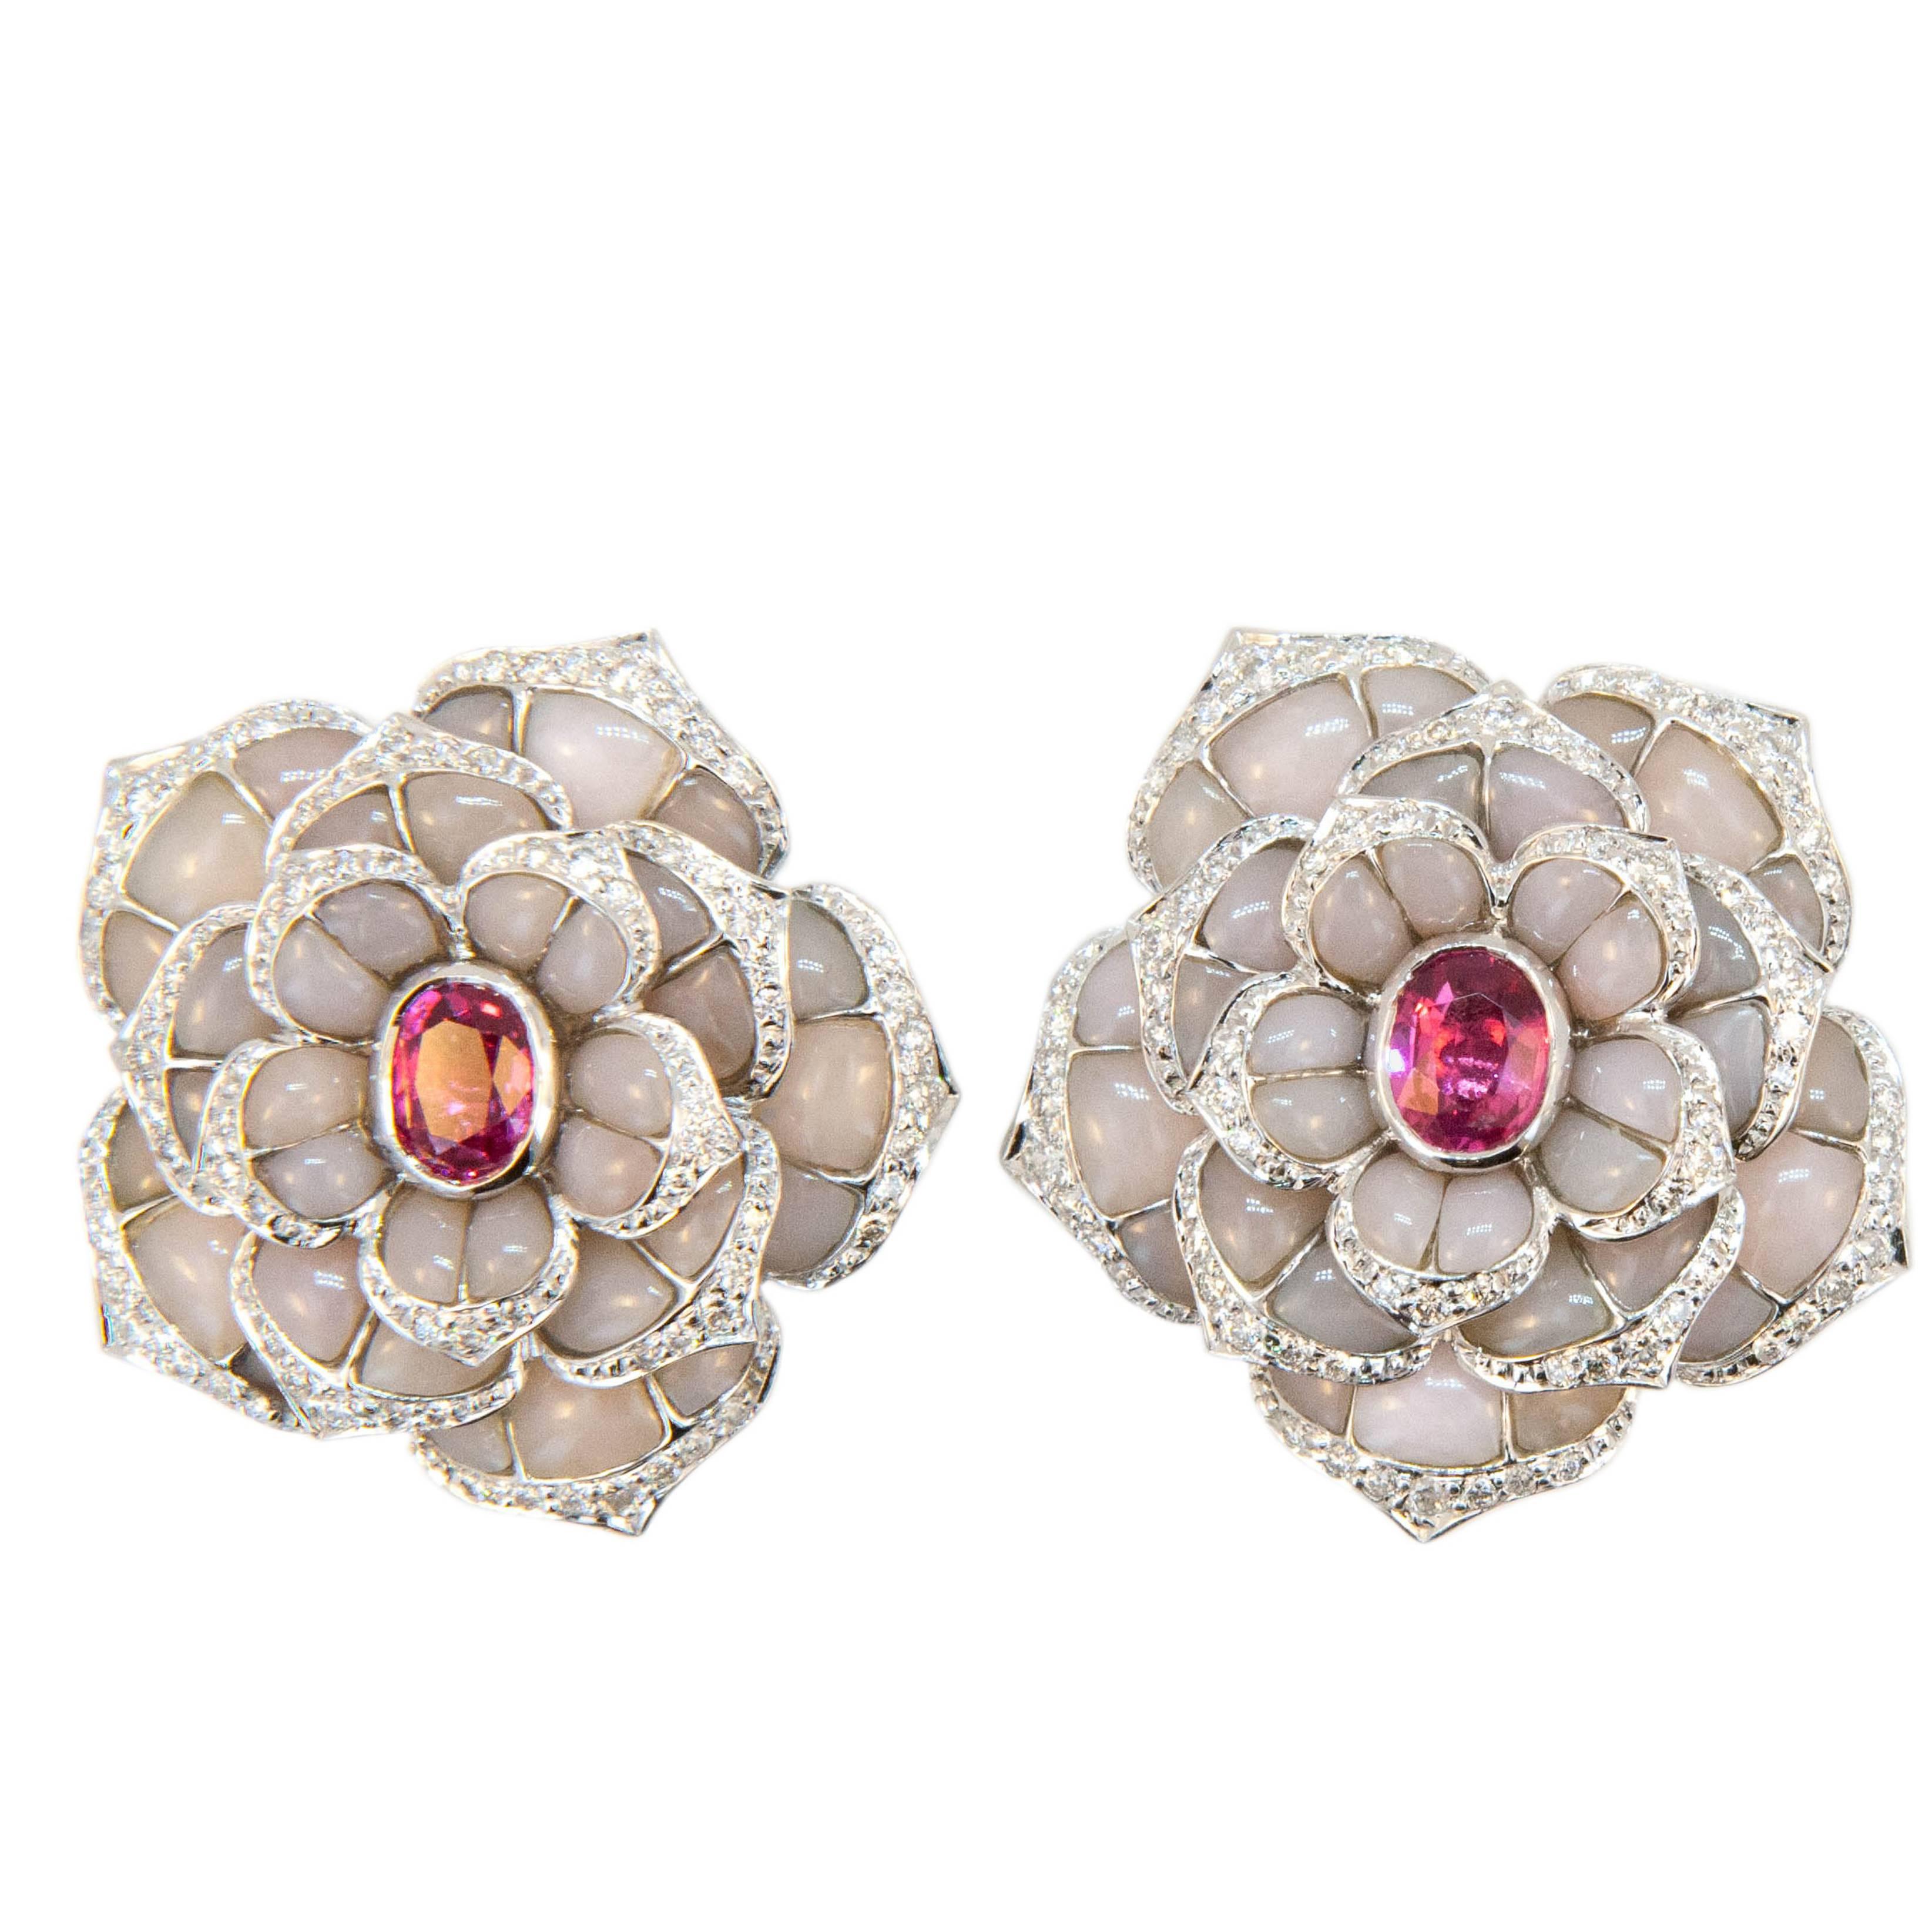 Laura Munder Pink Opal Pink Spinel Diamond White Gold Earrings